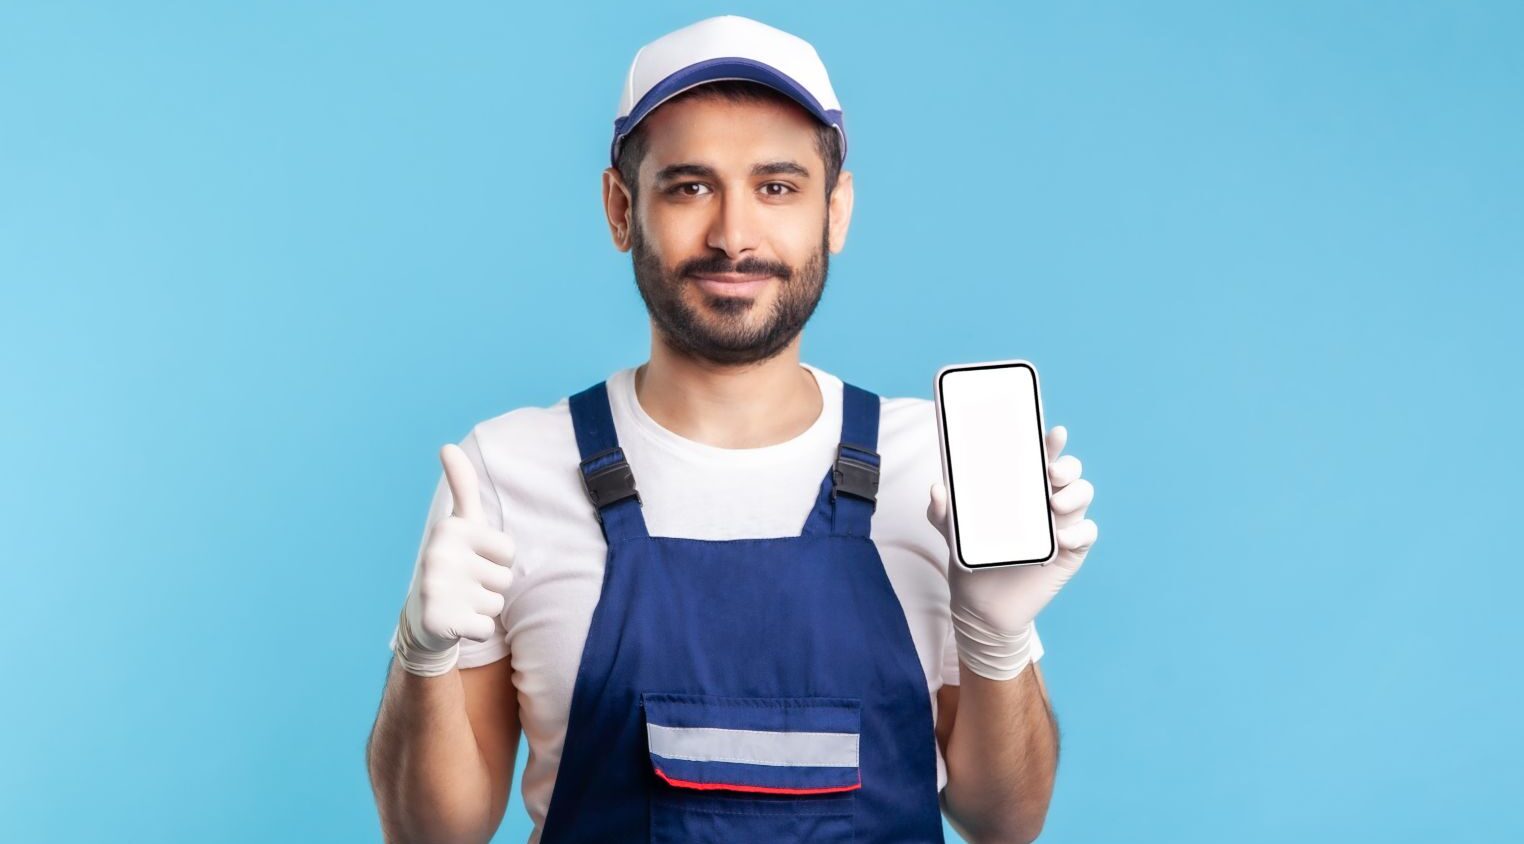 Plumber With A Mobile Phone Aspect Ratio 1472 816